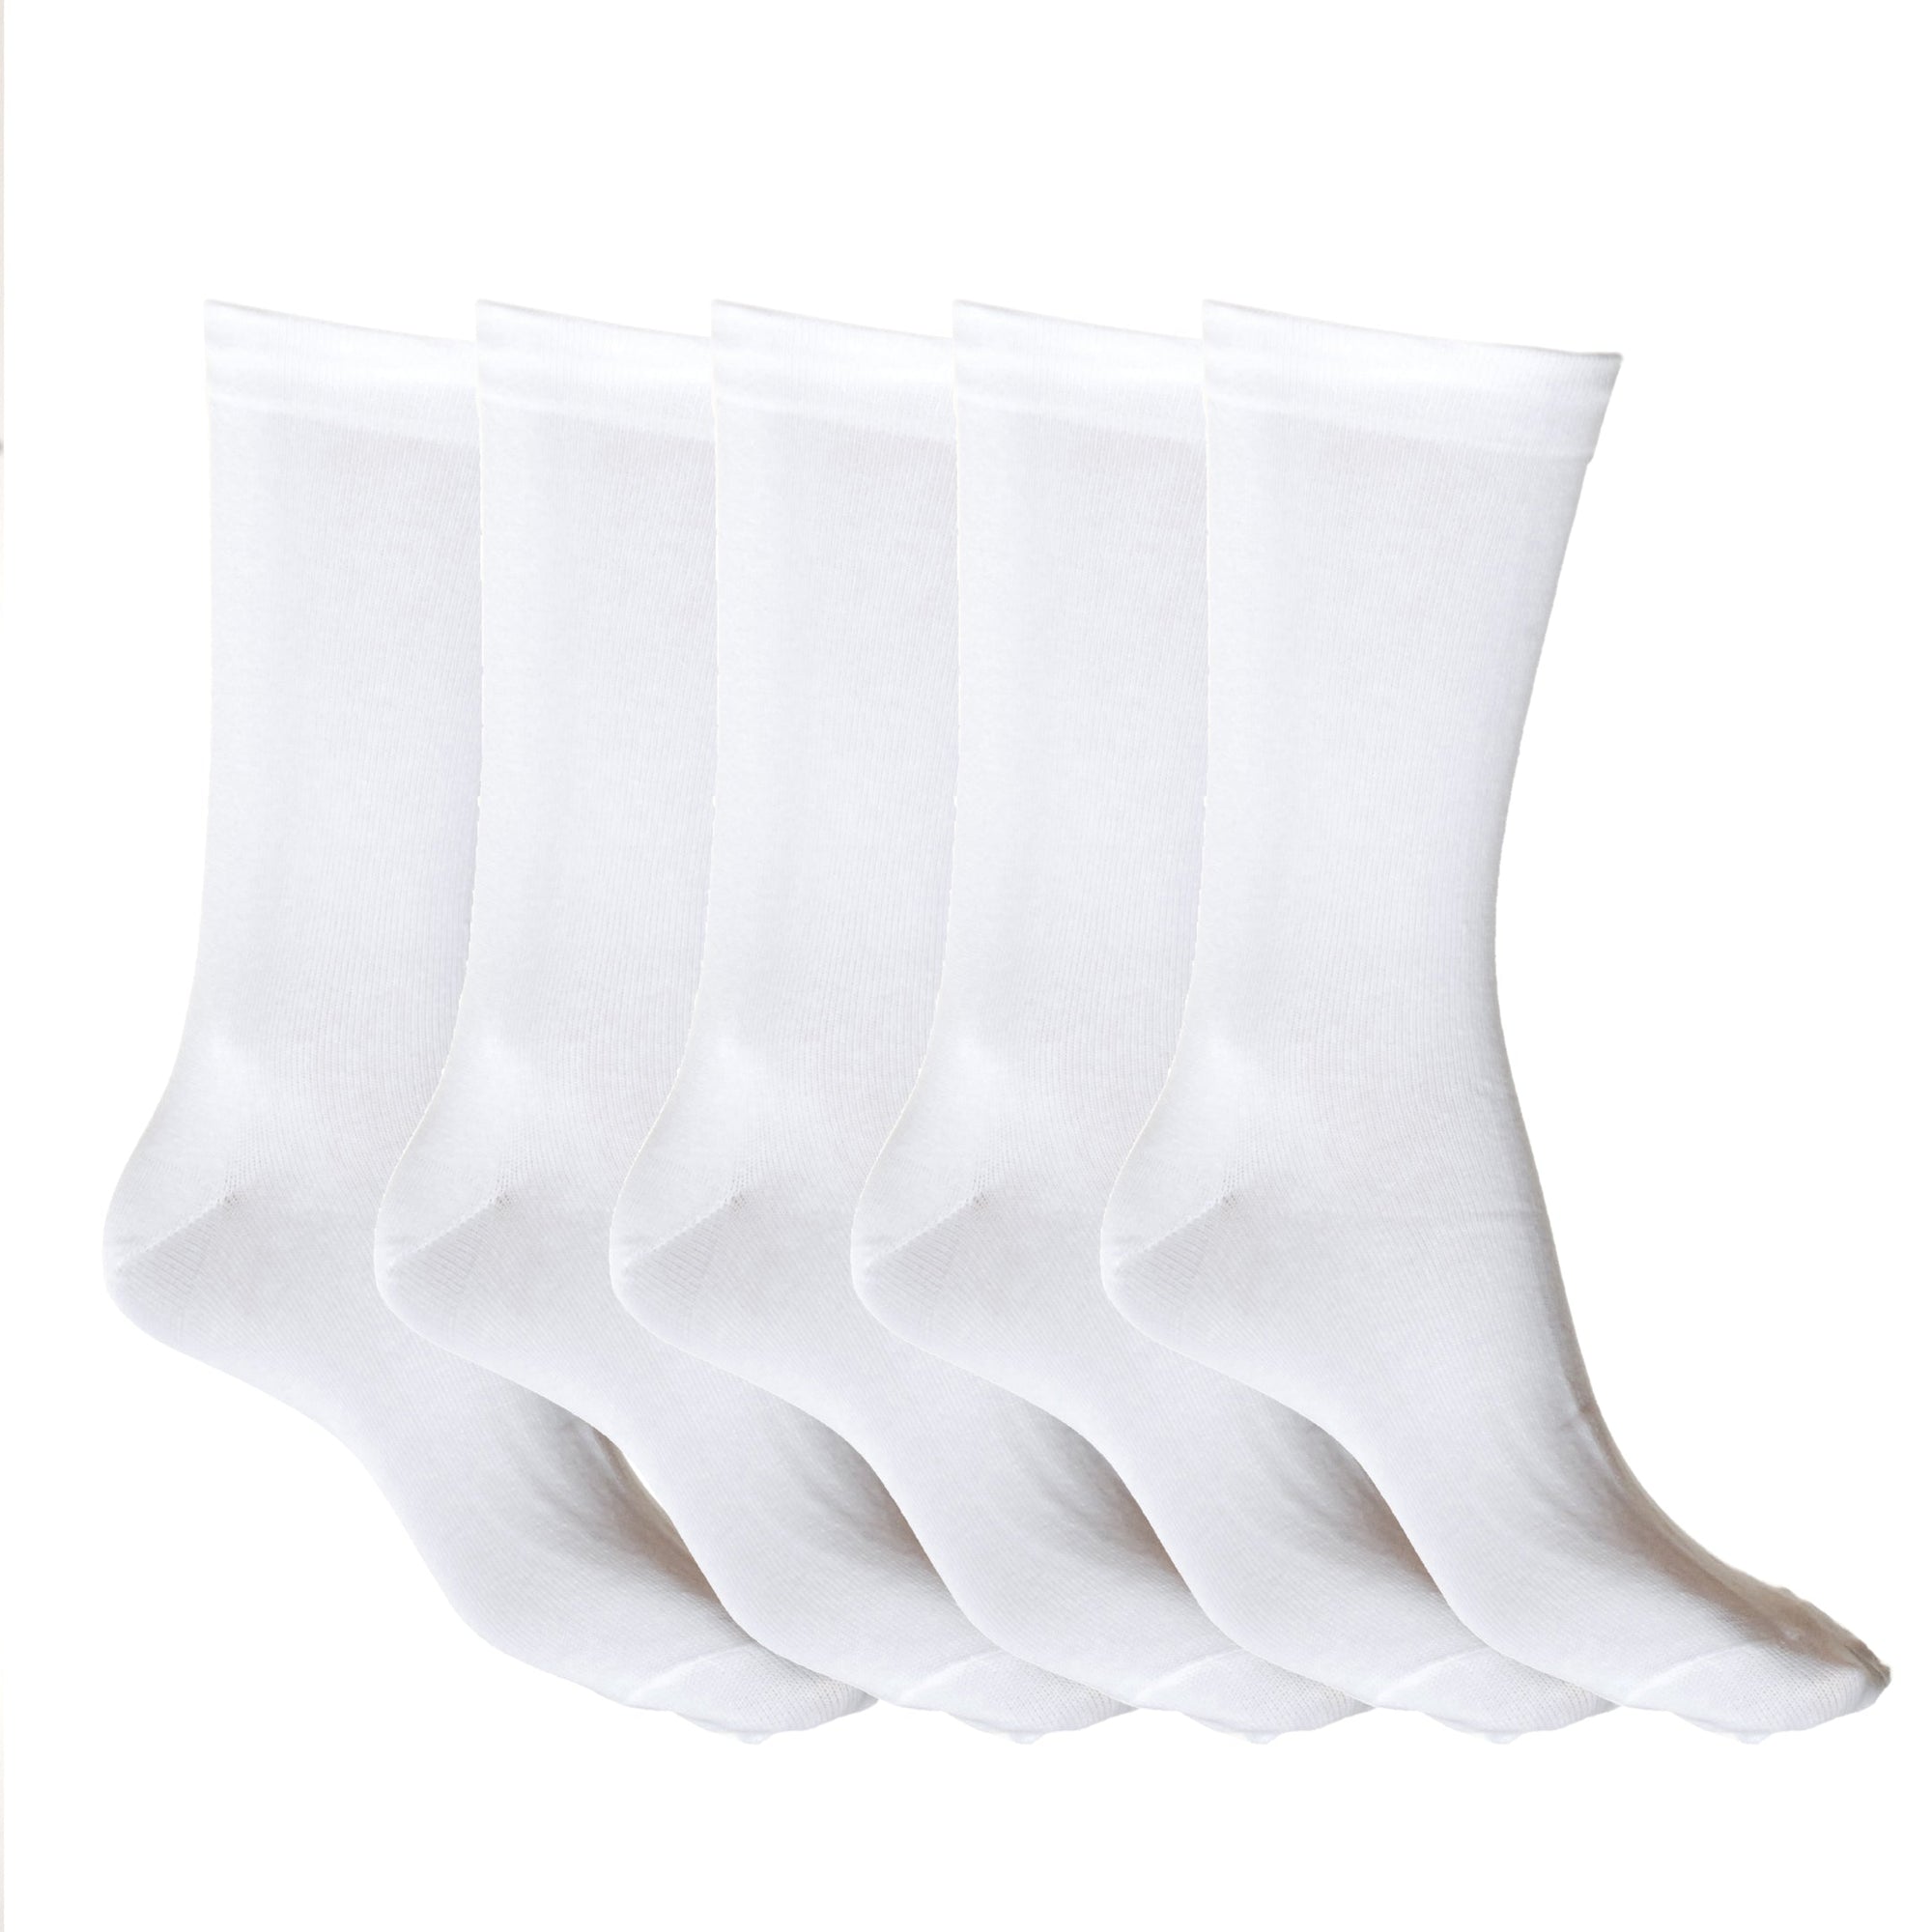 Loose Top Cotton Sock with Tough Toe™ White - 5 Pack Sale